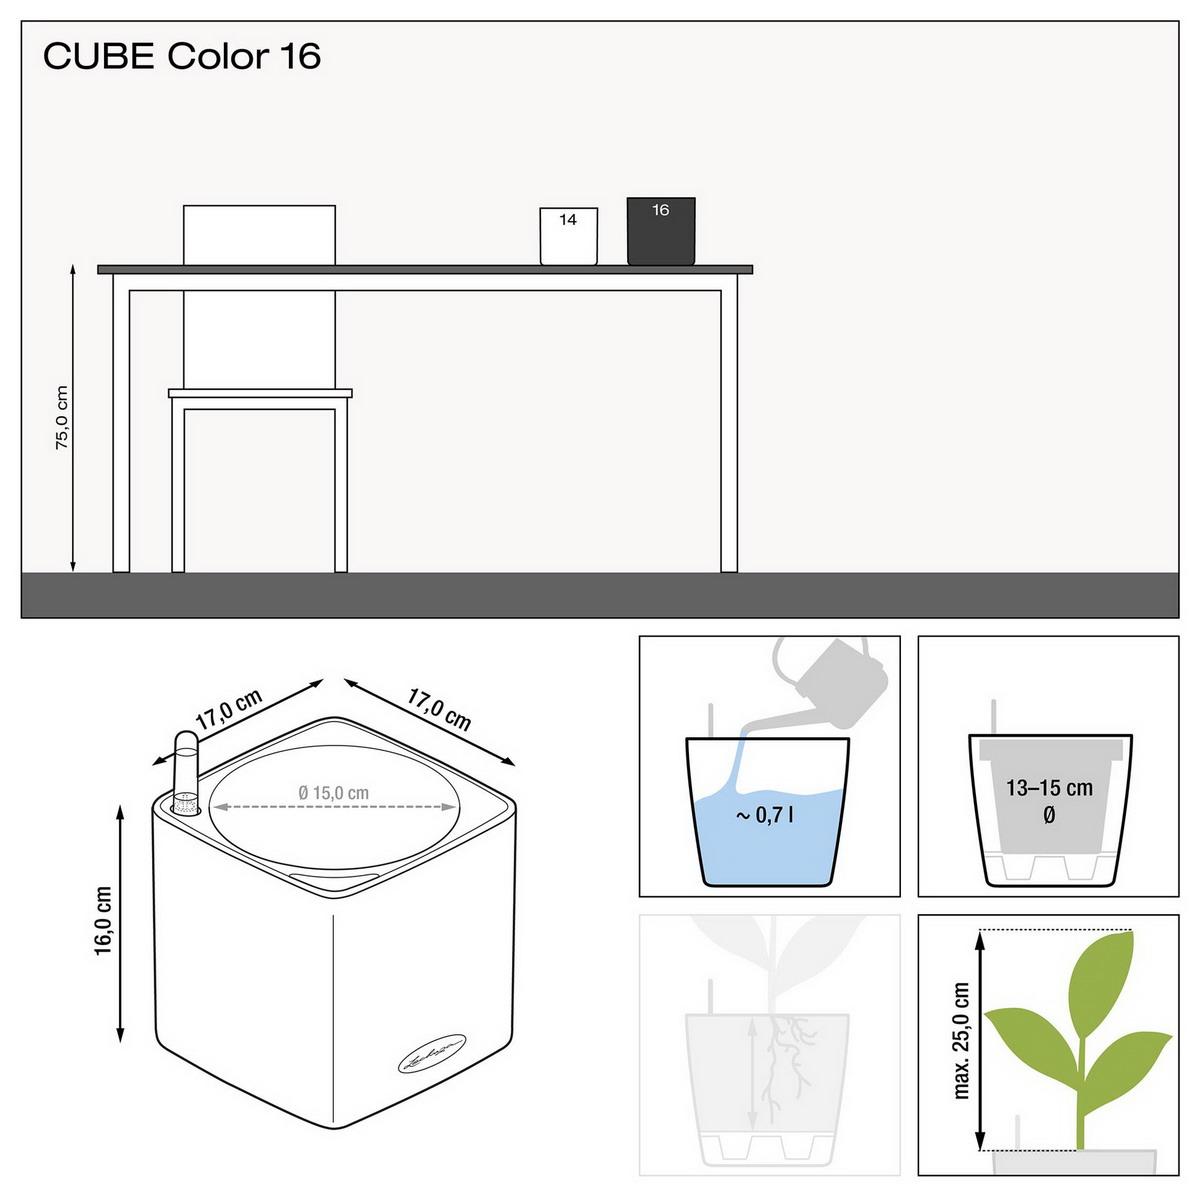 LECHUZA CUBE Color 14 Blackberry Poly Resin Table Self-watering Planter with Water Level Indicator H14 L14 W14 cm, 1.4L - citiplants.com